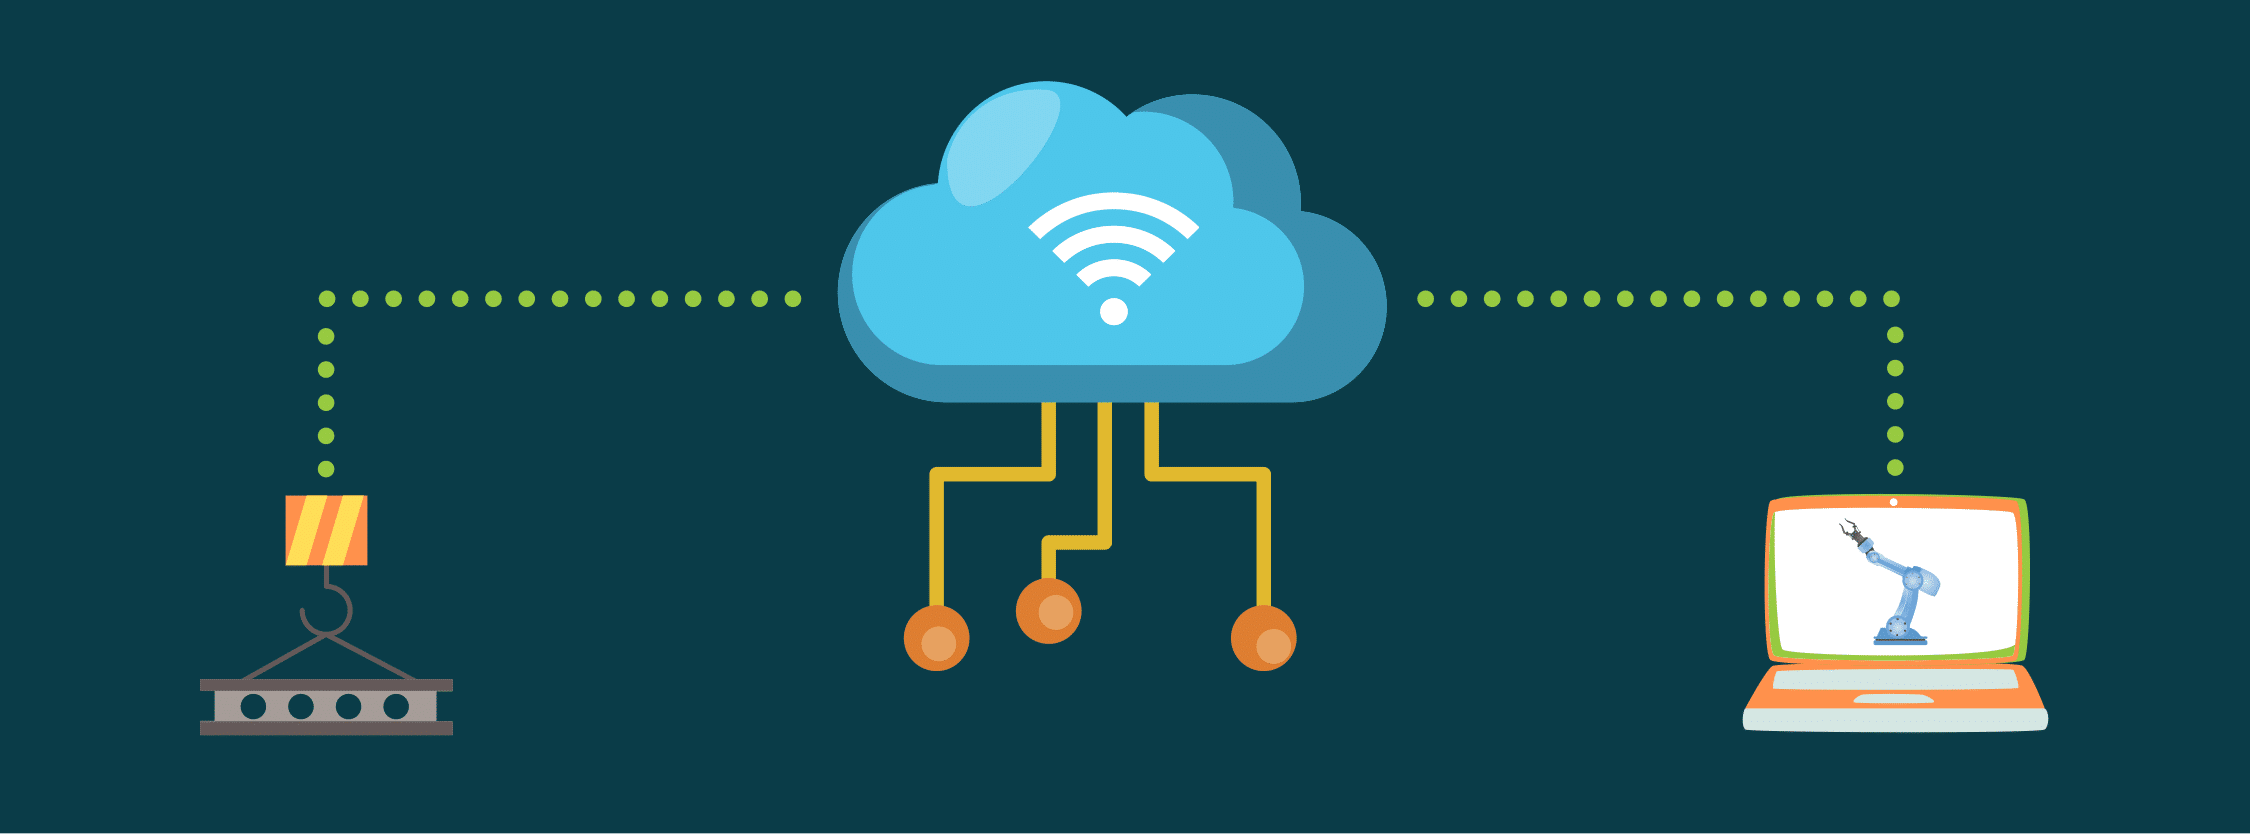 banner image of weighing system wirelessly connected to cloud connected to remote control system